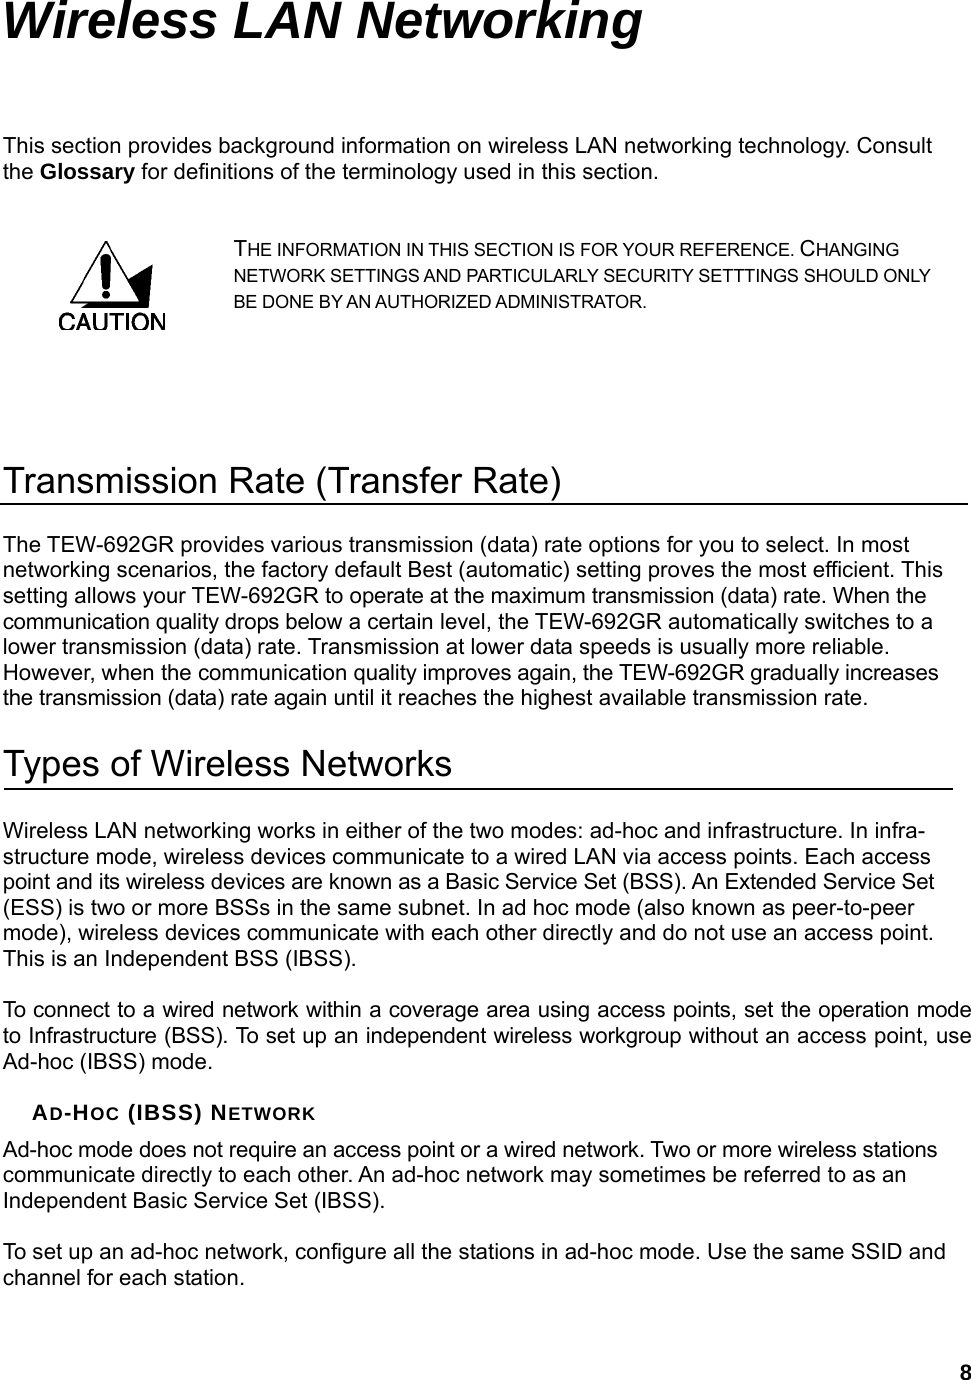  8Wireless LAN Networking This section provides background information on wireless LAN networking technology. Consult the Glossary for definitions of the terminology used in this section. THE INFORMATION IN THIS SECTION IS FOR YOUR REFERENCE. CHANGING NETWORK SETTINGS AND PARTICULARLY SECURITY SETTTINGS SHOULD ONLY BE DONE BY AN AUTHORIZED ADMINISTRATOR.   Transmission Rate (Transfer Rate) The TEW-692GR provides various transmission (data) rate options for you to select. In most networking scenarios, the factory default Best (automatic) setting proves the most efficient. This setting allows your TEW-692GR to operate at the maximum transmission (data) rate. When the communication quality drops below a certain level, the TEW-692GR automatically switches to a lower transmission (data) rate. Transmission at lower data speeds is usually more reliable. However, when the communication quality improves again, the TEW-692GR gradually increases the transmission (data) rate again until it reaches the highest available transmission rate. Types of Wireless Networks Wireless LAN networking works in either of the two modes: ad-hoc and infrastructure. In infra-structure mode, wireless devices communicate to a wired LAN via access points. Each access point and its wireless devices are known as a Basic Service Set (BSS). An Extended Service Set (ESS) is two or more BSSs in the same subnet. In ad hoc mode (also known as peer-to-peer mode), wireless devices communicate with each other directly and do not use an access point. This is an Independent BSS (IBSS).  To connect to a wired network within a coverage area using access points, set the operation mode to Infrastructure (BSS). To set up an independent wireless workgroup without an access point, use Ad-hoc (IBSS) mode.  AD-HOC (IBSS) NETWORK Ad-hoc mode does not require an access point or a wired network. Two or more wireless stations communicate directly to each other. An ad-hoc network may sometimes be referred to as an Independent Basic Service Set (IBSS).  To set up an ad-hoc network, configure all the stations in ad-hoc mode. Use the same SSID and channel for each station.  